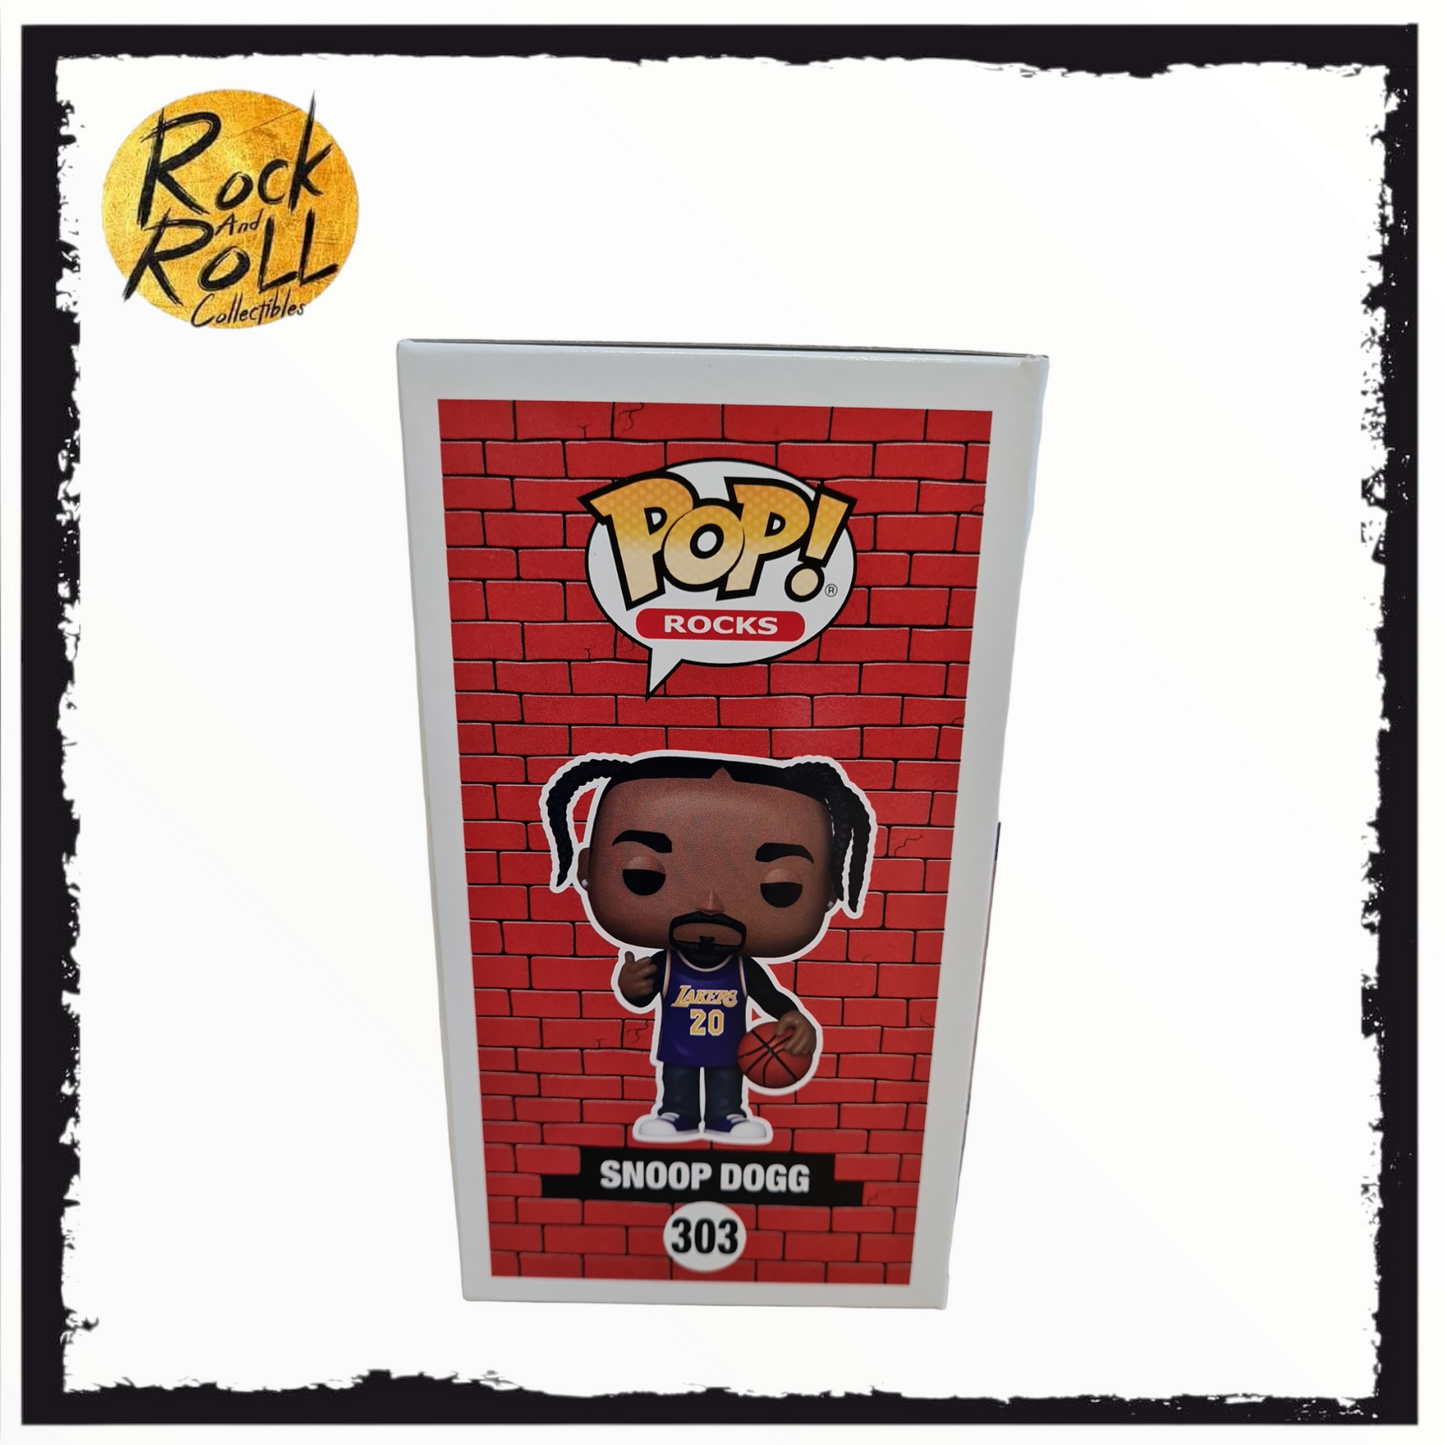 Snoop Dogg (Lakers Jersey) Funko Pop! Rocks #303 The Dogg House X Funko Exclusive LE 15,000 Pieces.